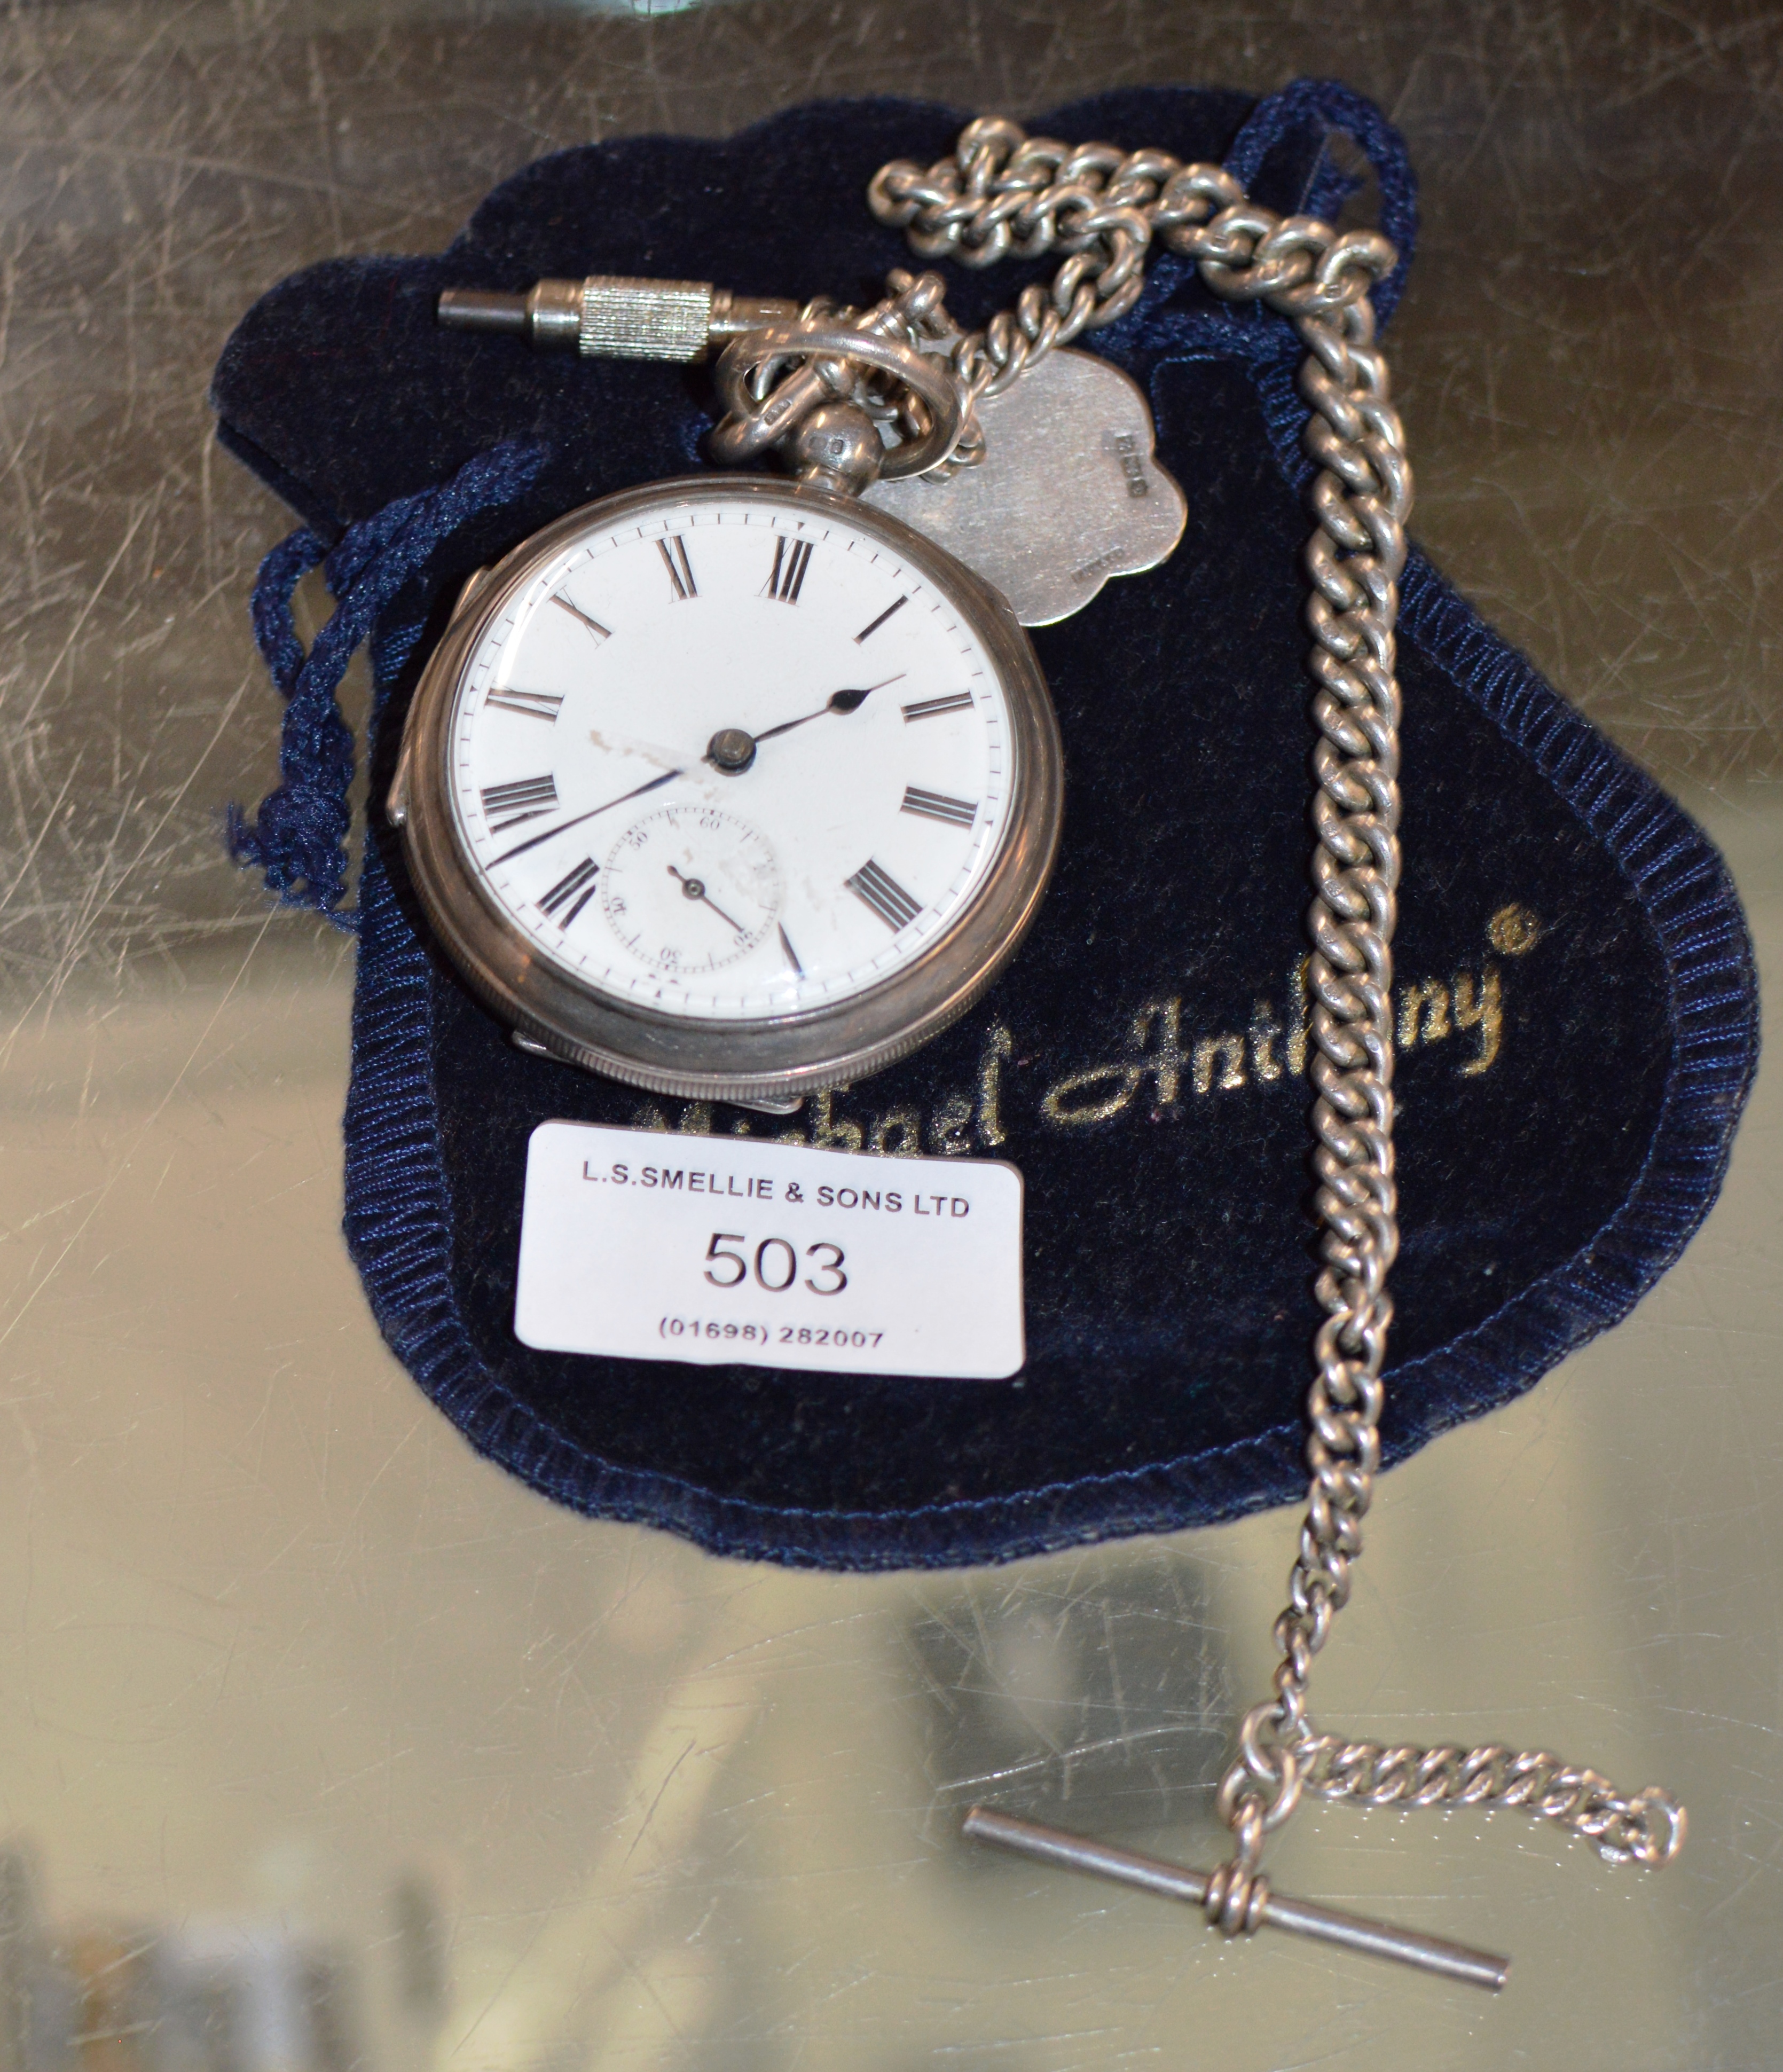 SILVER CASED OPEN FACE POCKET WATCH WITH SILVER FOB, SILVER WATCH CHAIN & T-BAR